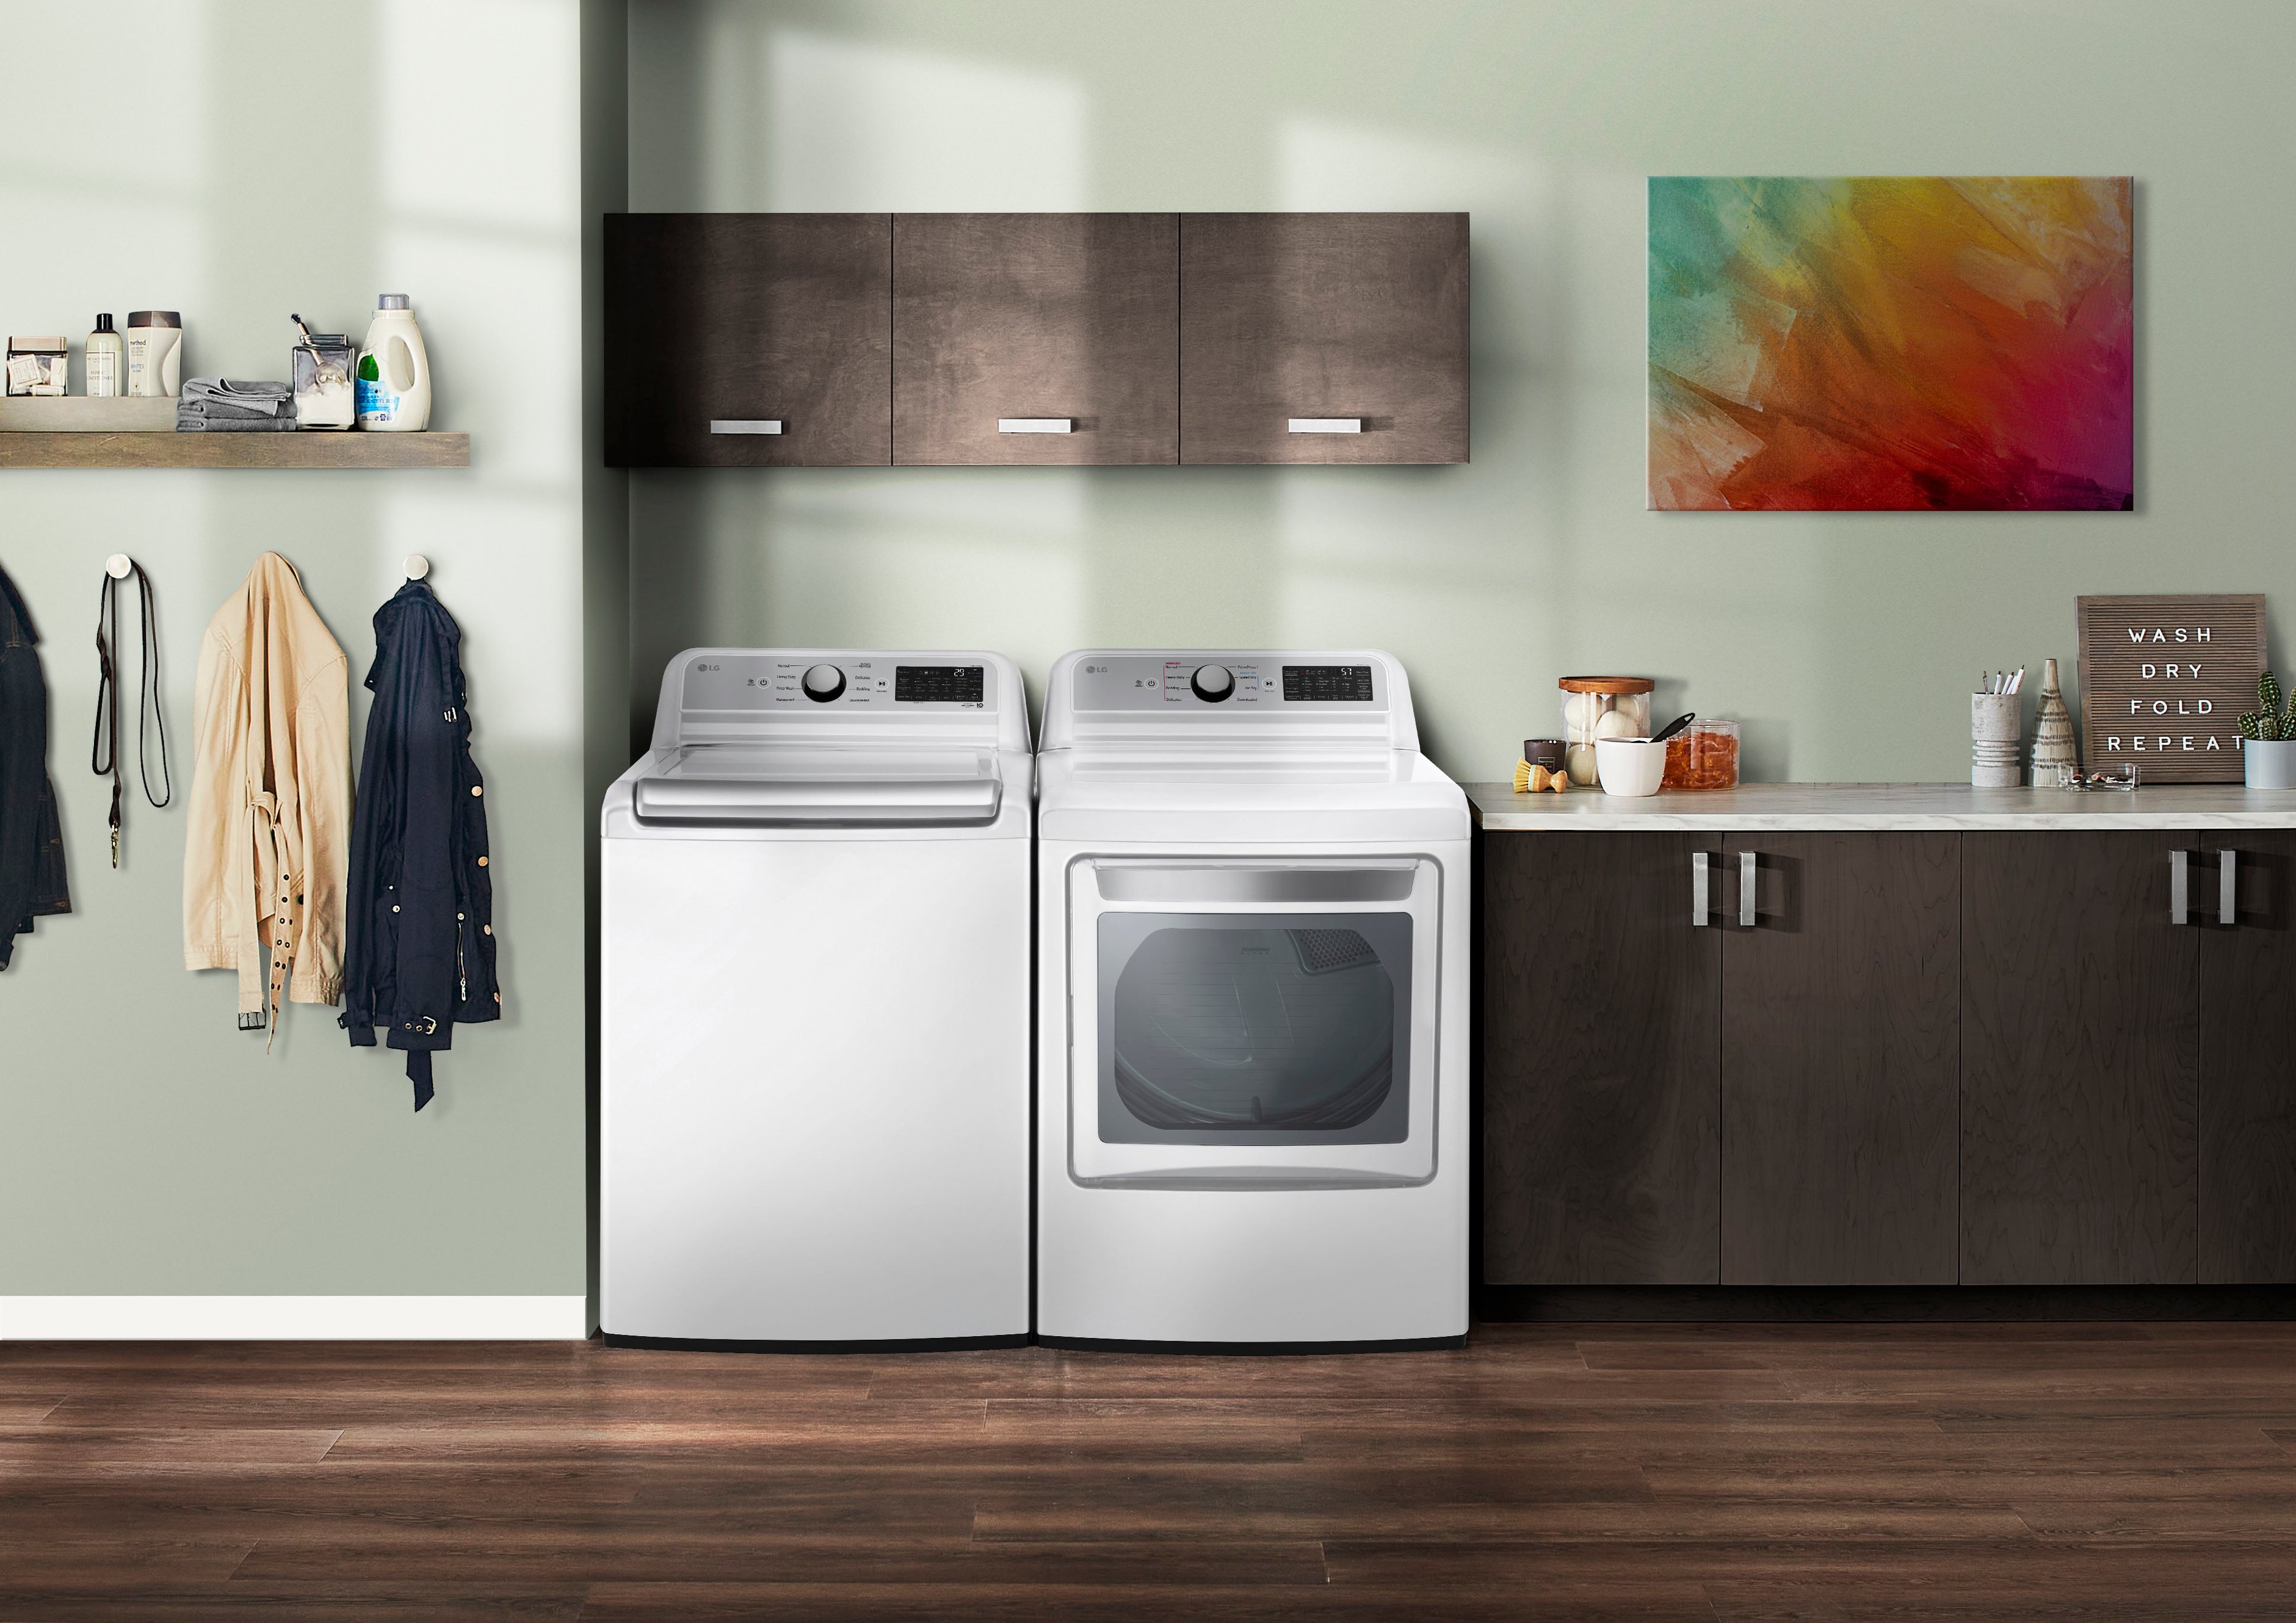 LG Top Load Washer WT7400CW